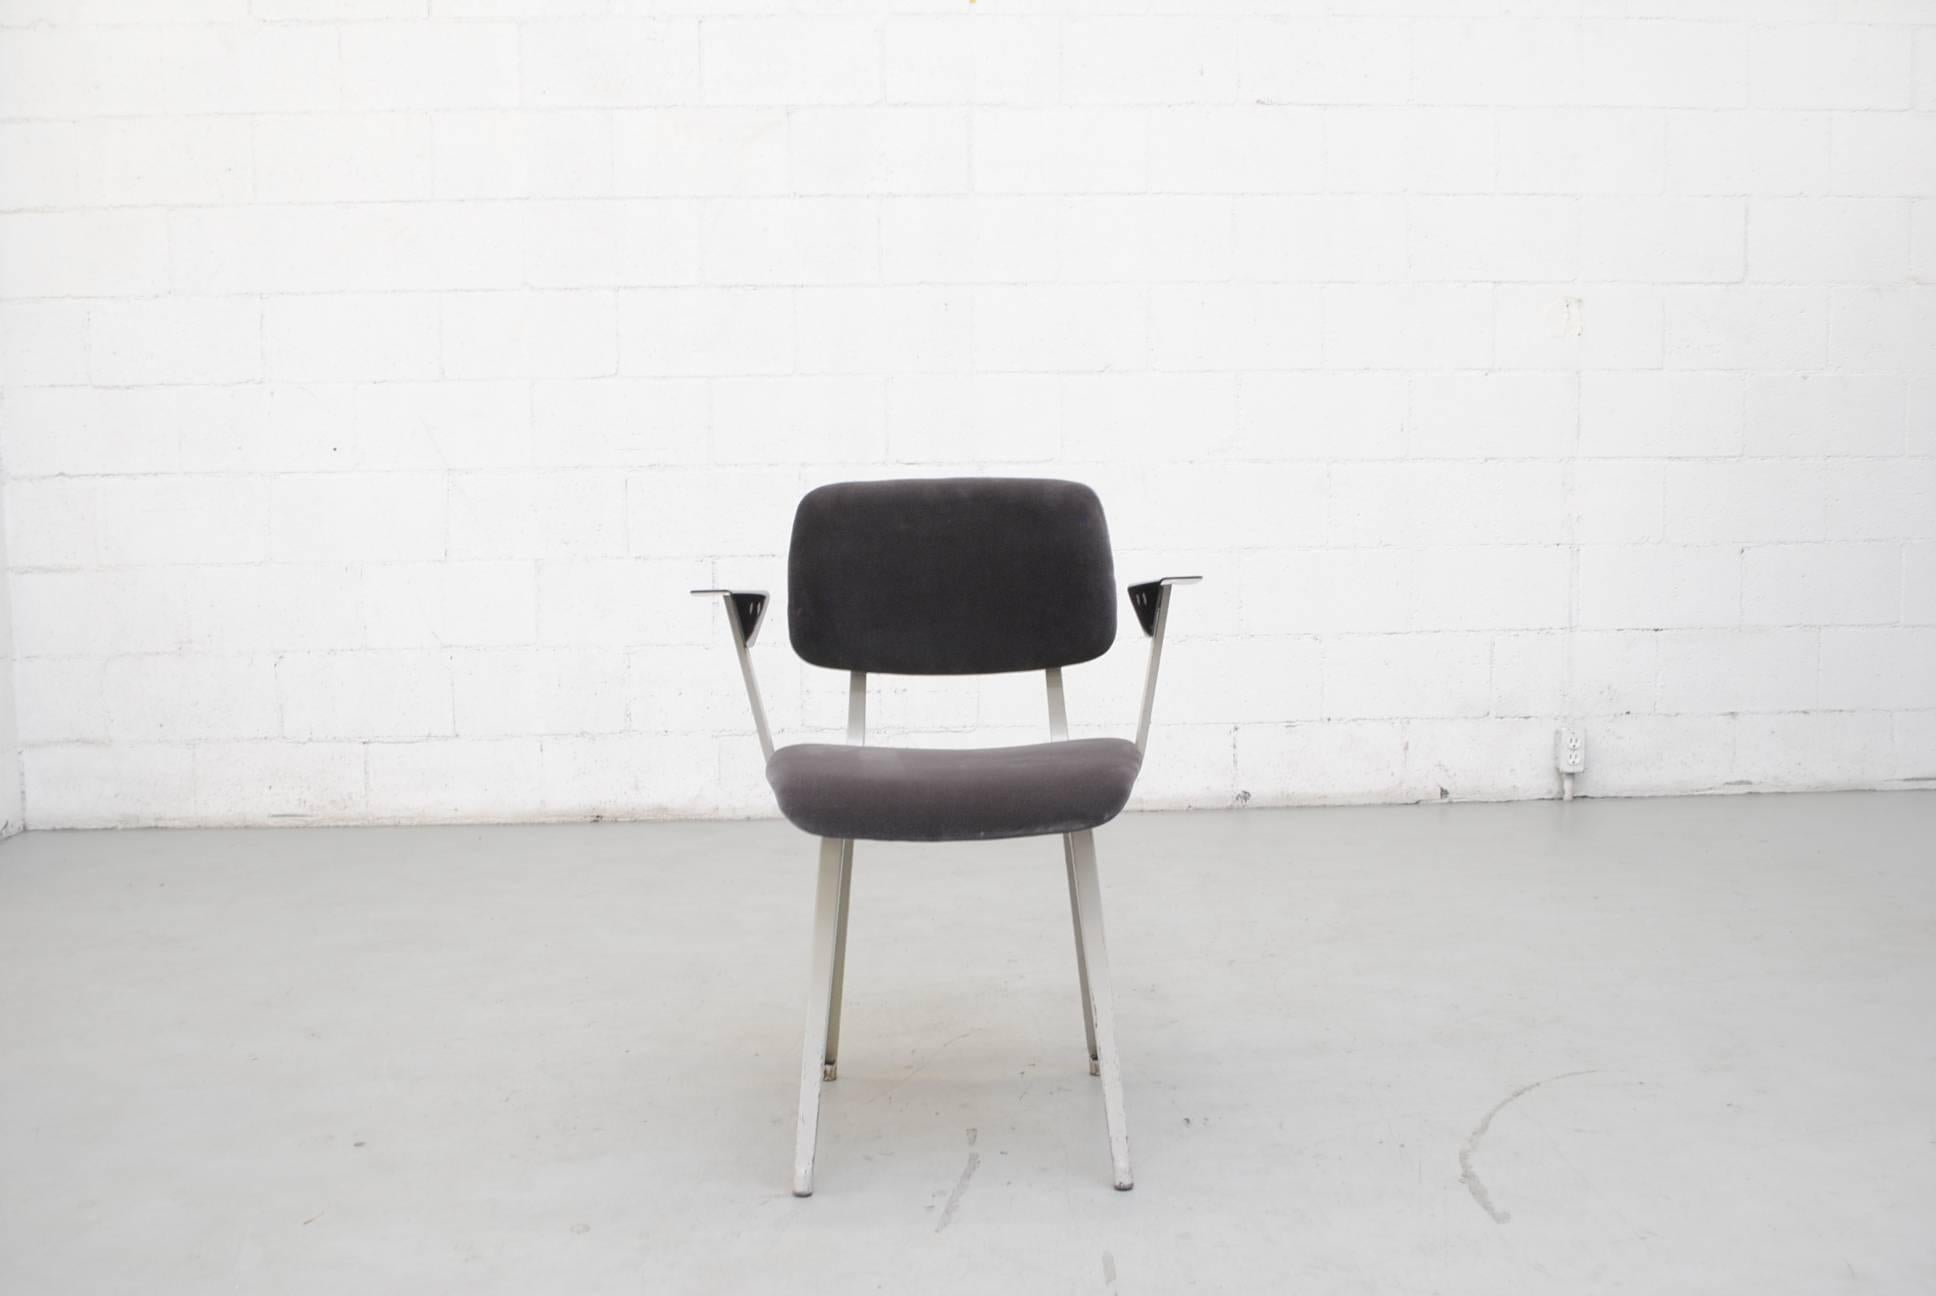 Friso Kramers most infamous Industrial chair with light grey sheet metal chairs, signature angled Melamine arm rests and new seal grey velvet upholstery. Frames in original condition with visible wear and scratching to the frames. One chair has a